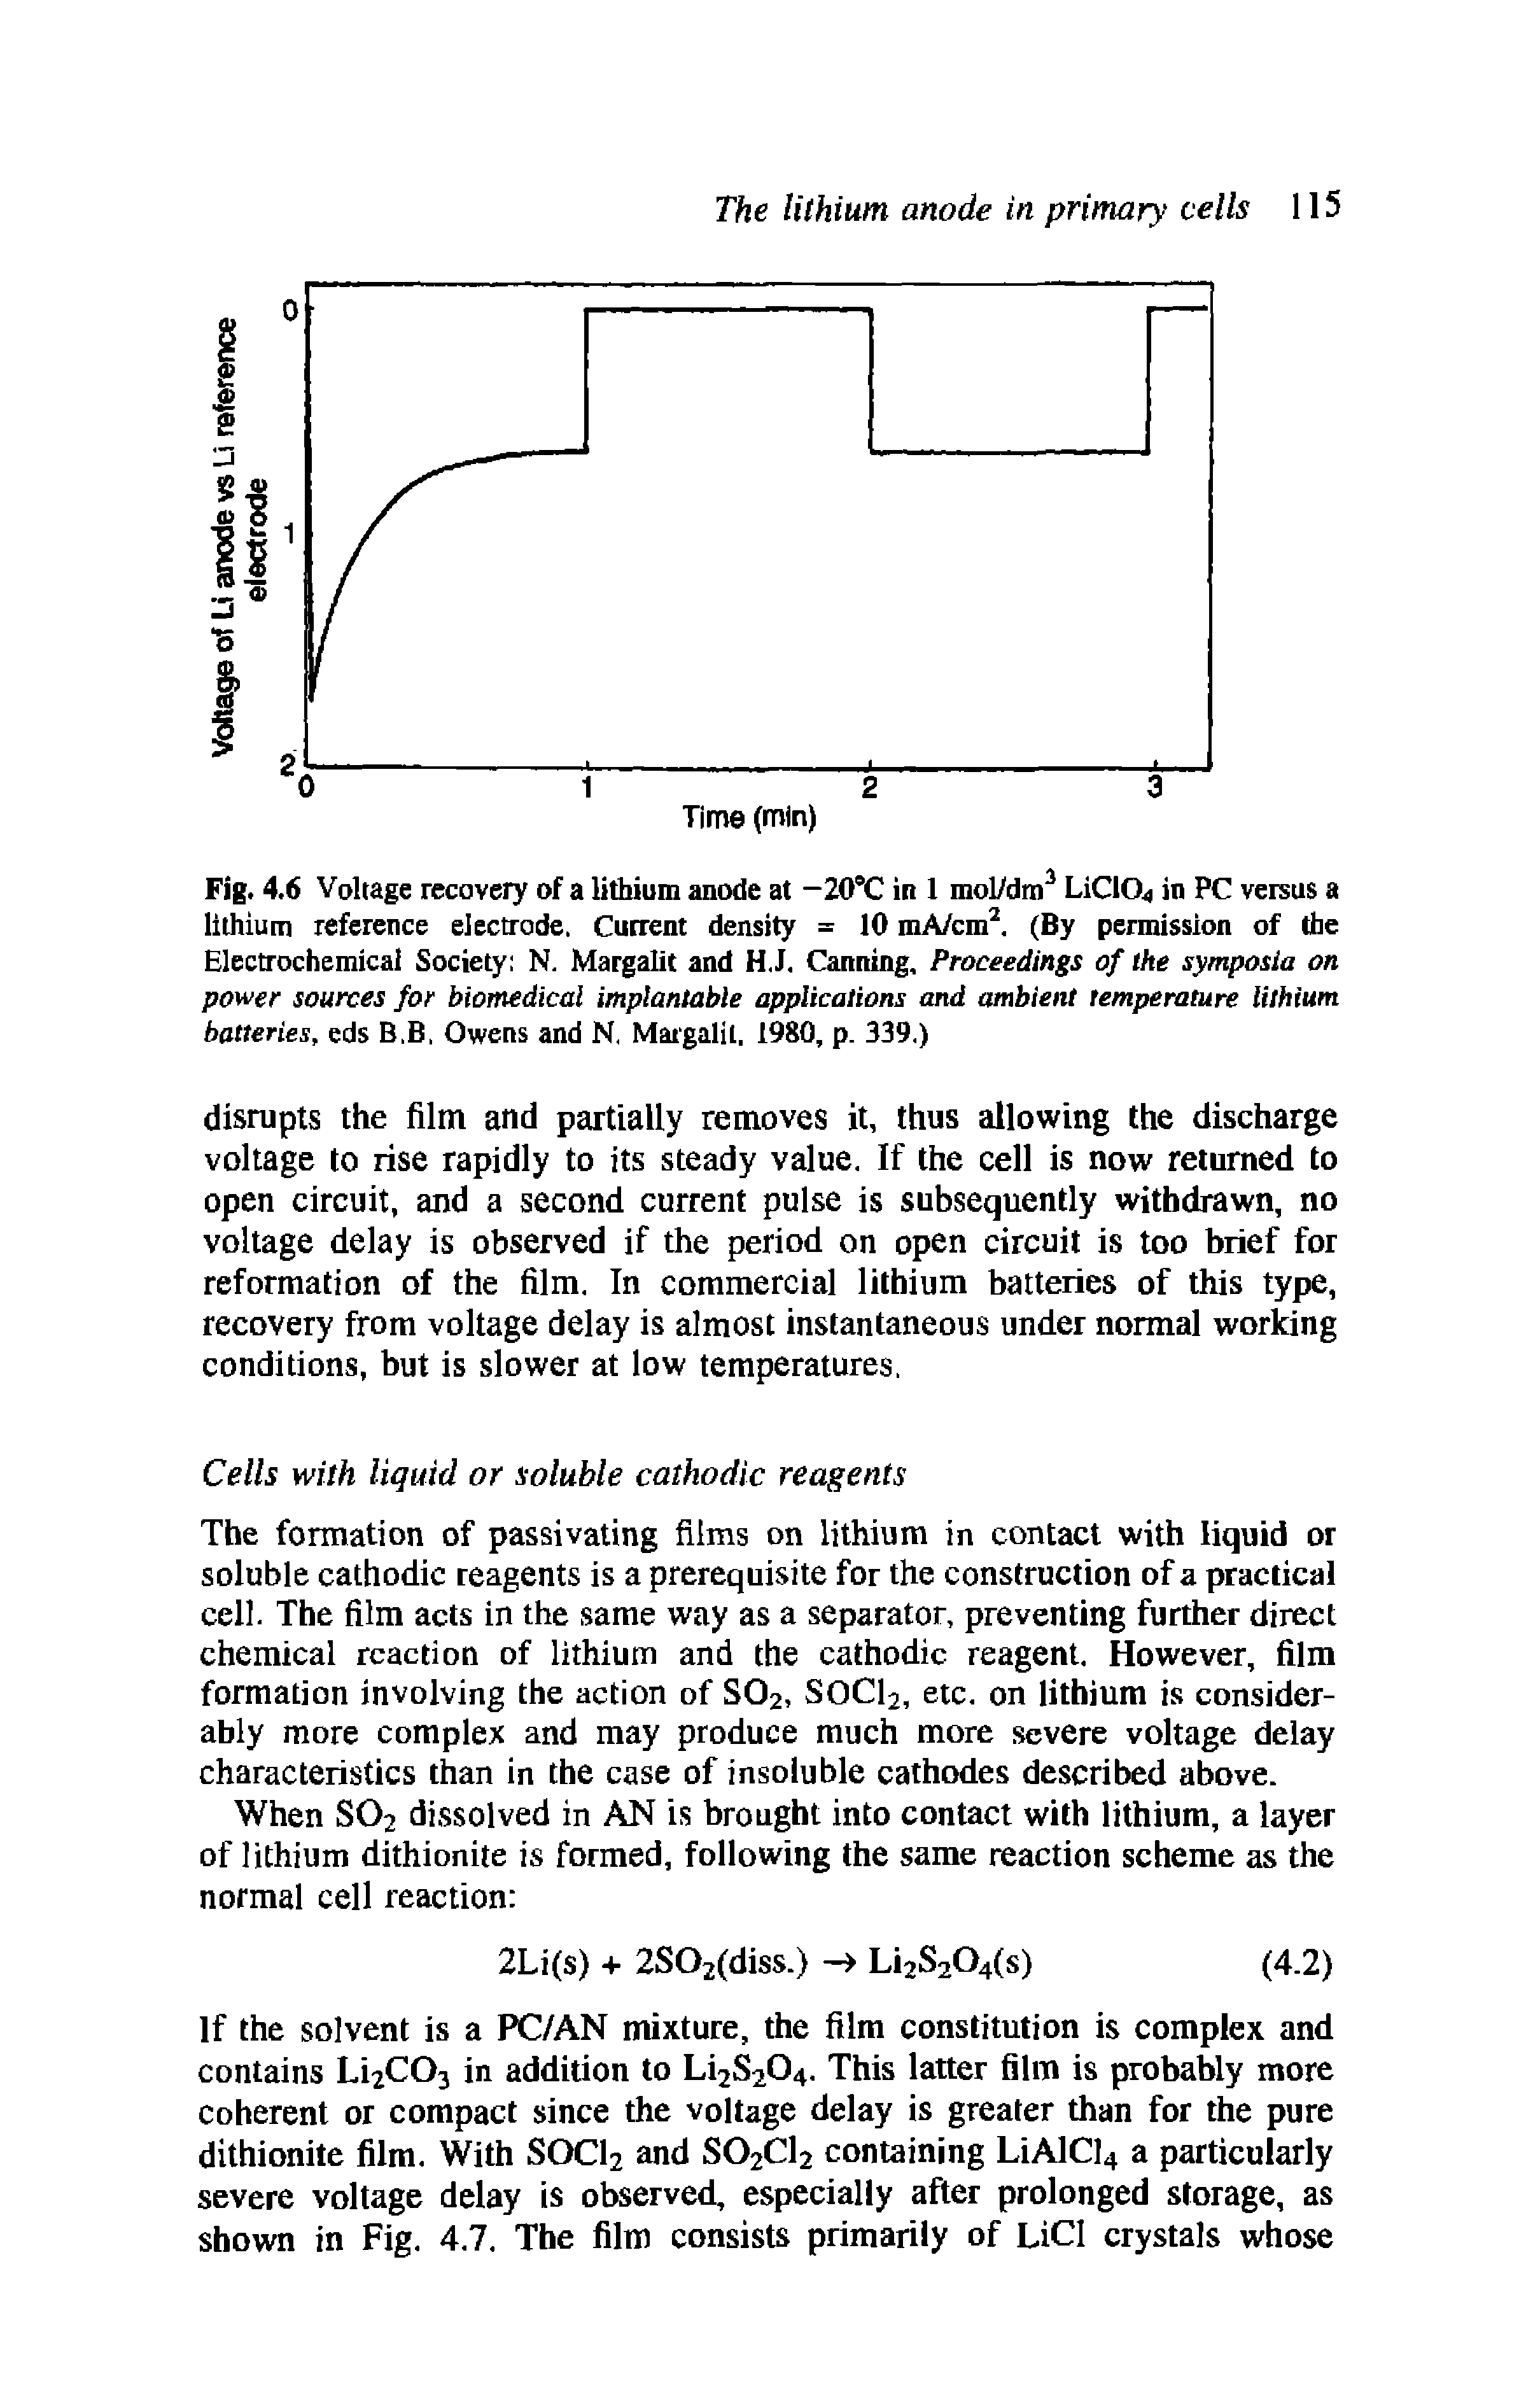 Fig. 4.6 Voltage recovery of a lithium anode at -20°C in 1 mol/dm3 LiClO in PC versus a lithium reference electrode. Current density = 10 mA/cm2. (By permission of the Electrochemical Society N. Margalit and H.J. Canning, Proceedings of the symposia on power sources for biomedical implantable applications and ambient temperature lithium batteries, eds B.B, Owens and N, Margalit, 1980, p. 339.)...